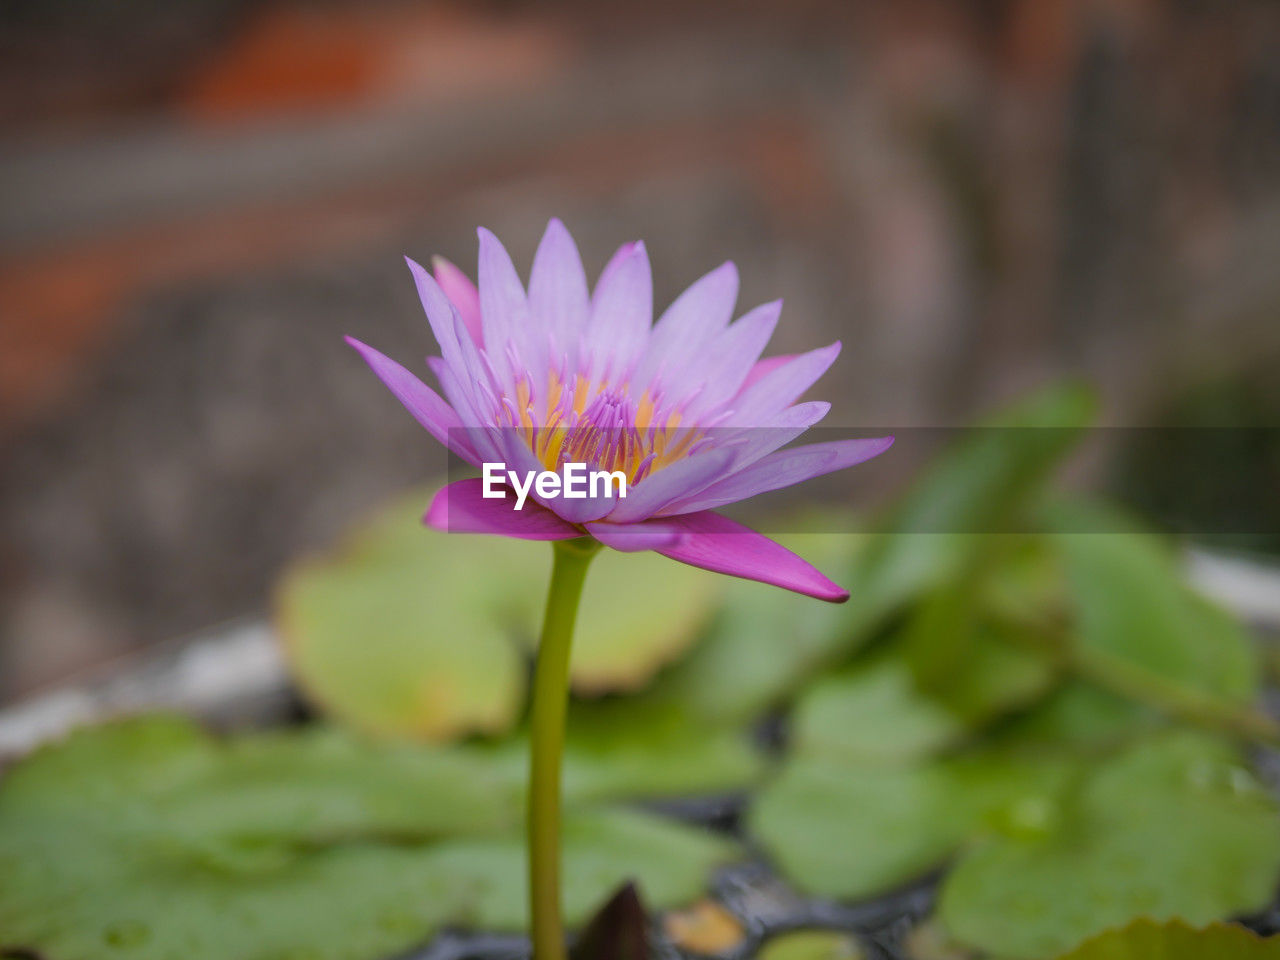 flower, flowering plant, freshness, plant, beauty in nature, water lily, petal, flower head, close-up, fragility, pink, inflorescence, nature, pond, leaf, water, plant part, lotus water lily, macro photography, growth, focus on foreground, purple, no people, lily, aquatic plant, blossom, outdoors, wildflower, botany, springtime, day, floating, pollen, floating on water, selective focus, green, plant stem, yellow, magenta, tranquility, environment